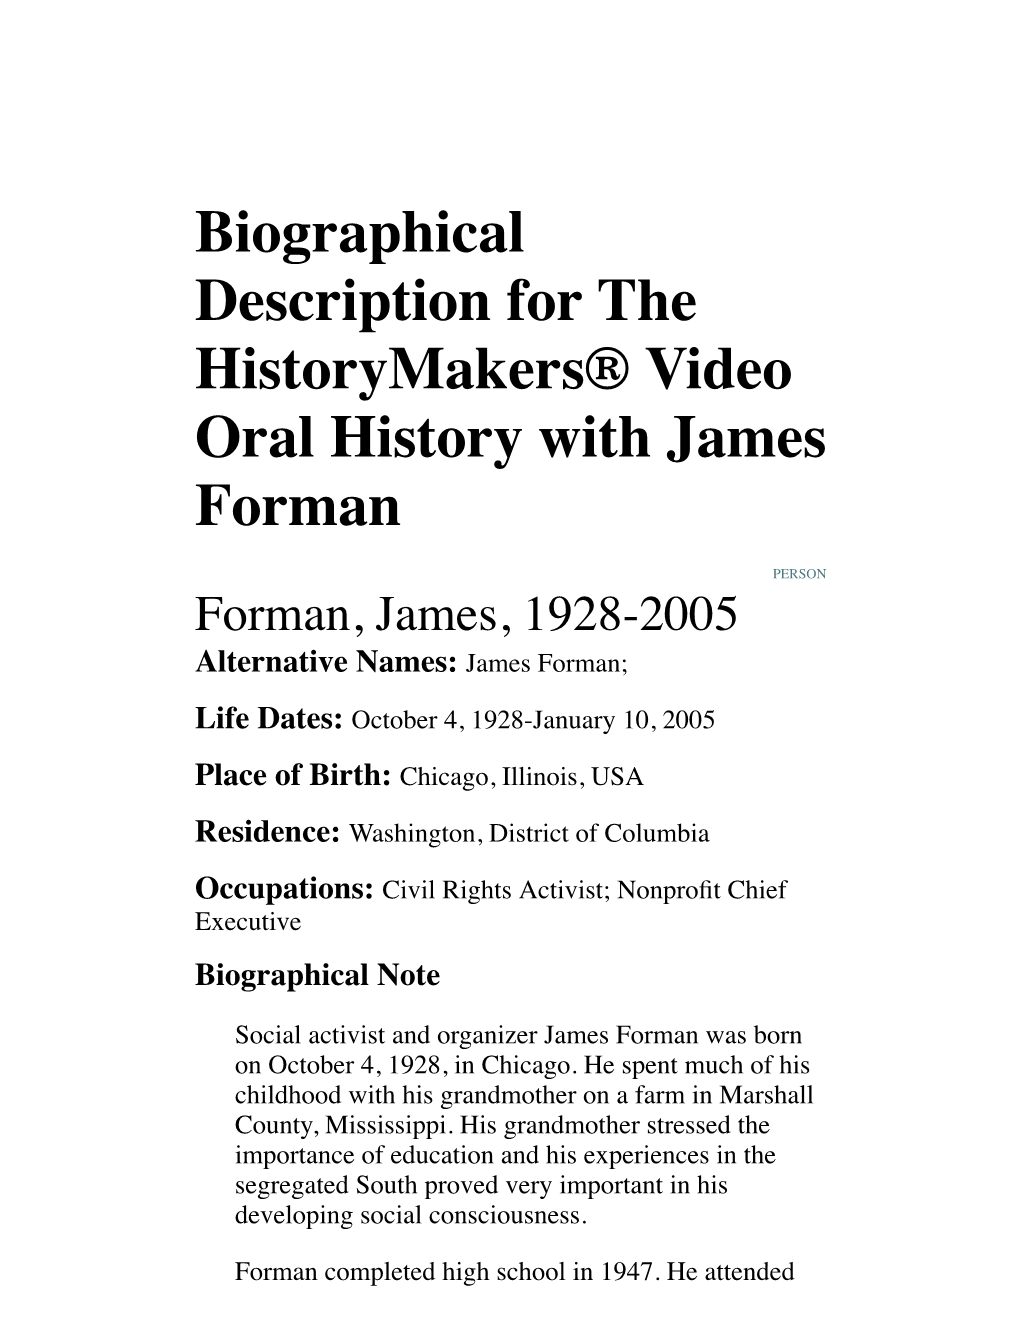 Biographical Description for the Historymakers® Video Oral History with James Forman